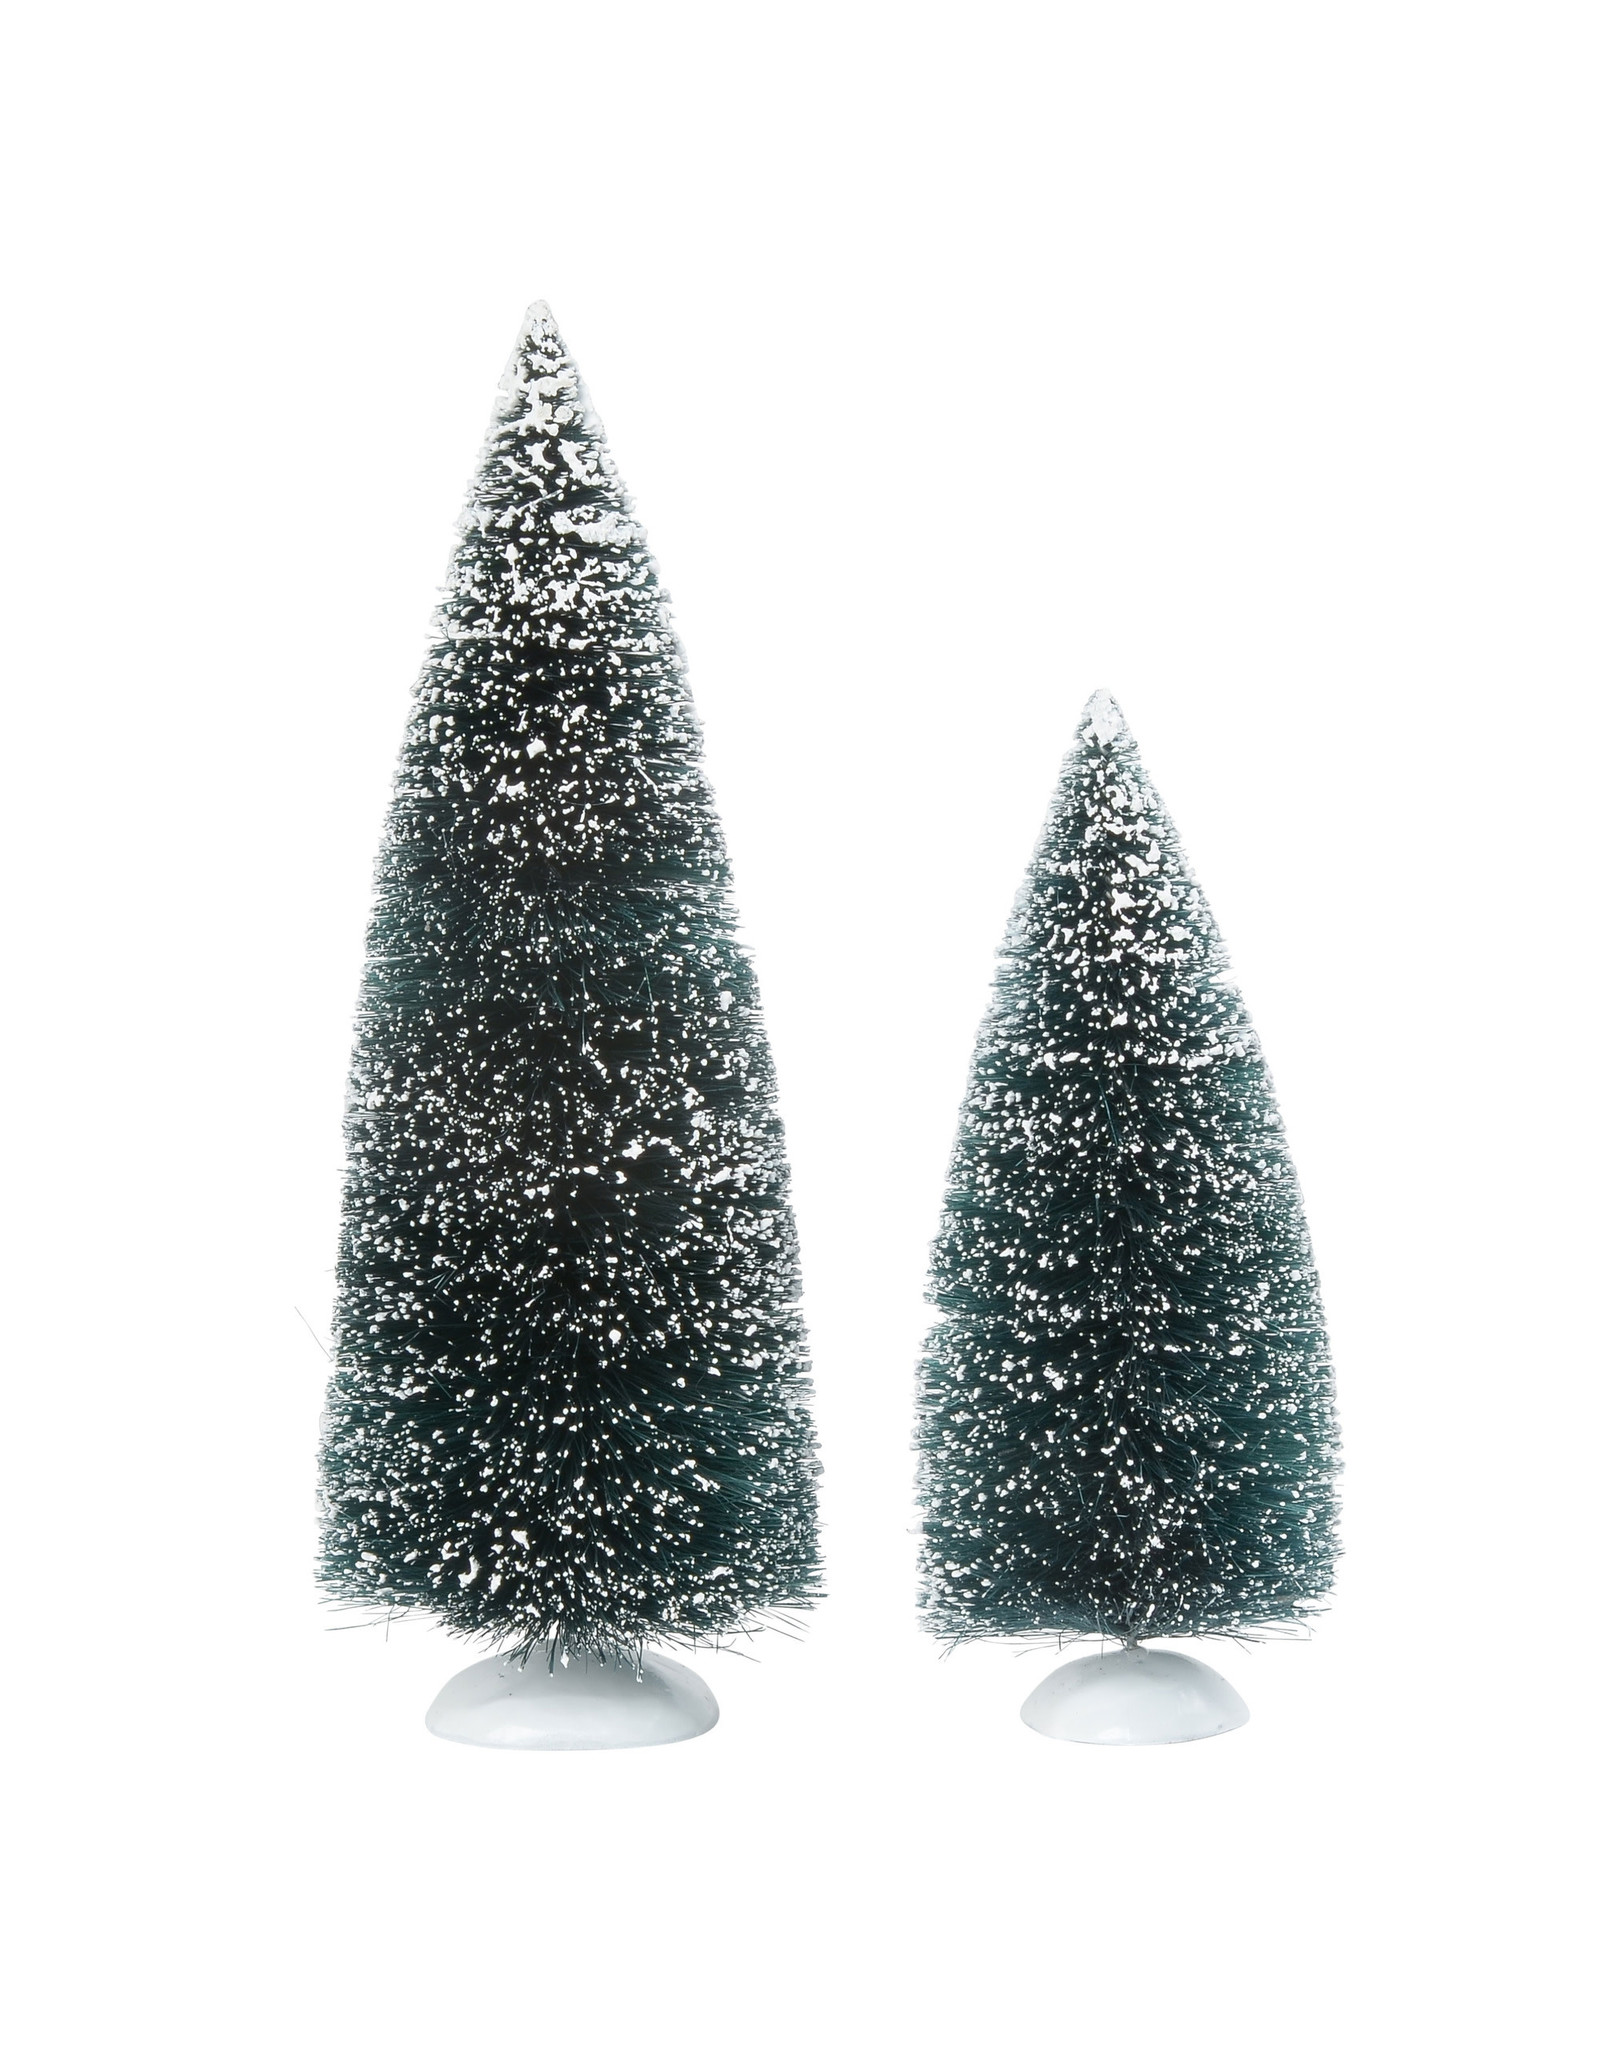 Department 56 Bag-O-Frosted Topiaries